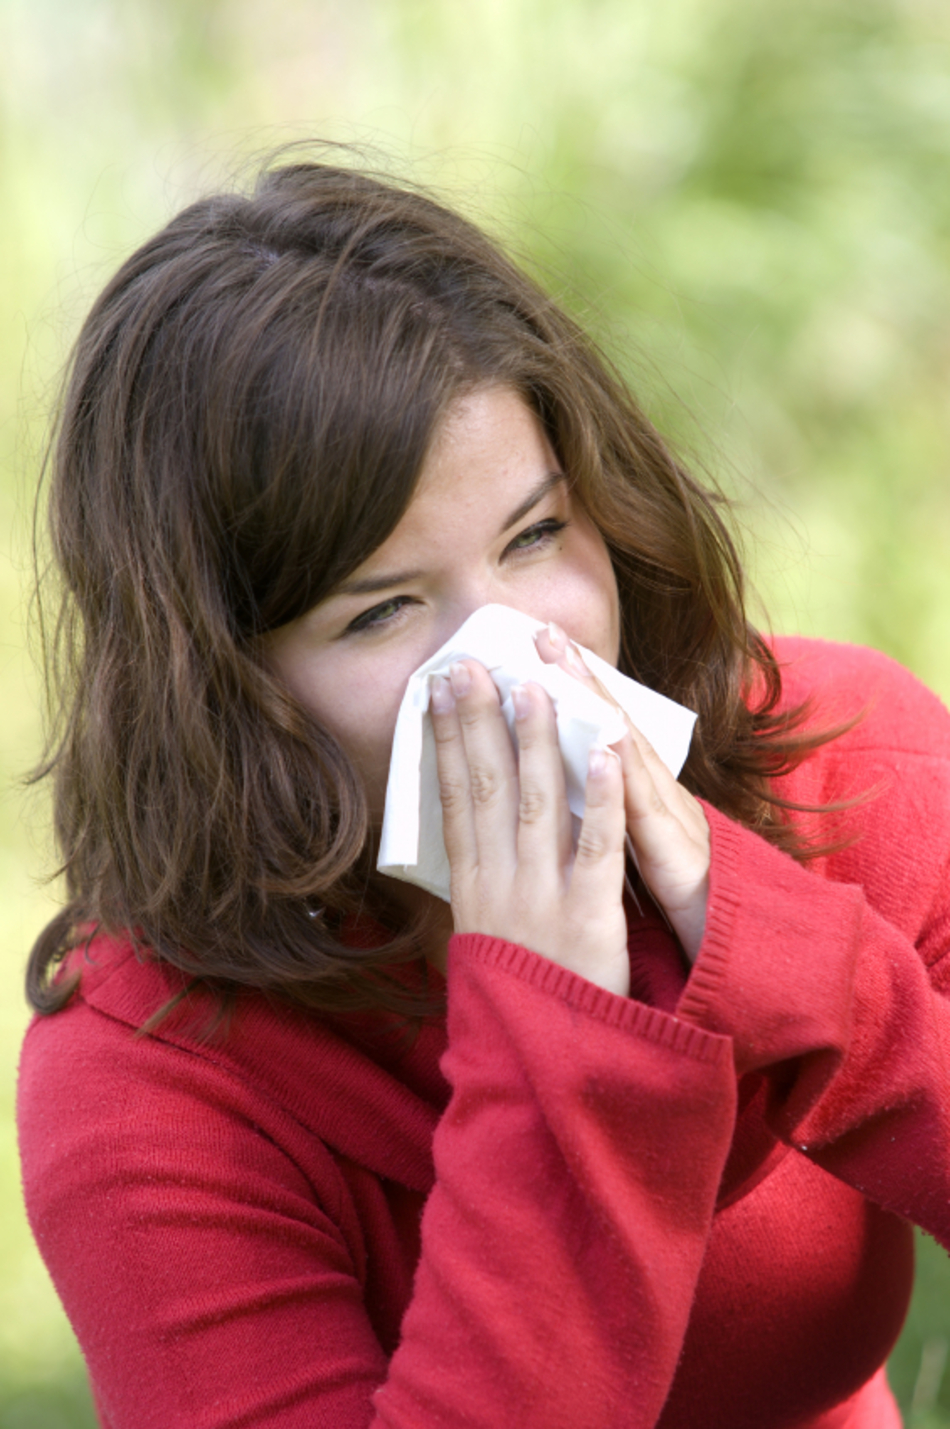 Treatment Options for Your Stuffy Nose & Sinuses